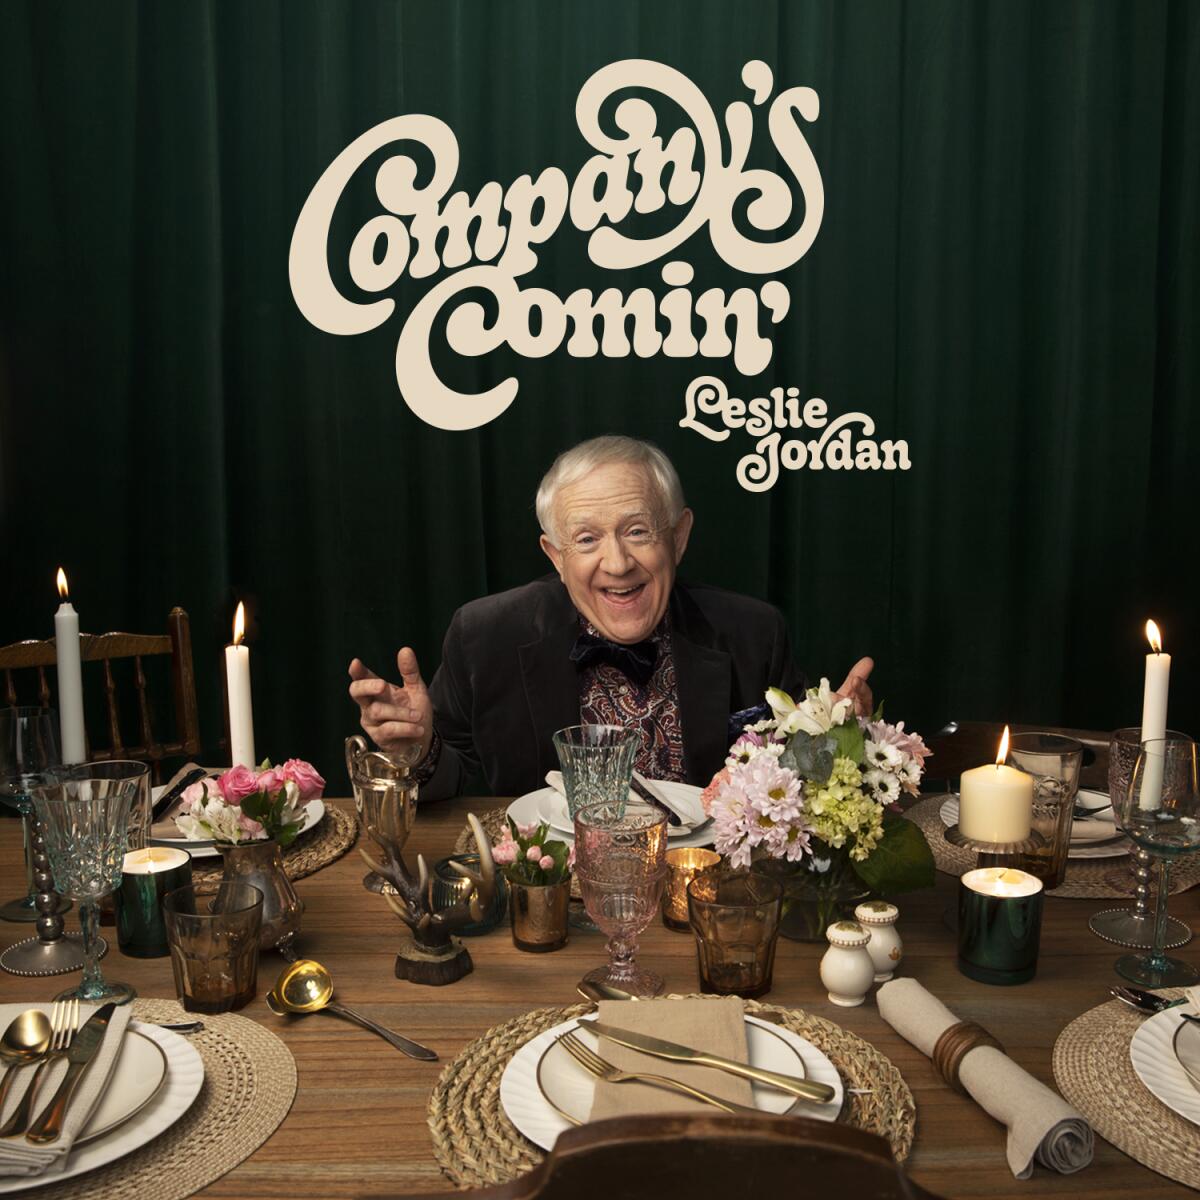 Leslie Jordan sits at a table with place settings and lit candles for the cover of his new album